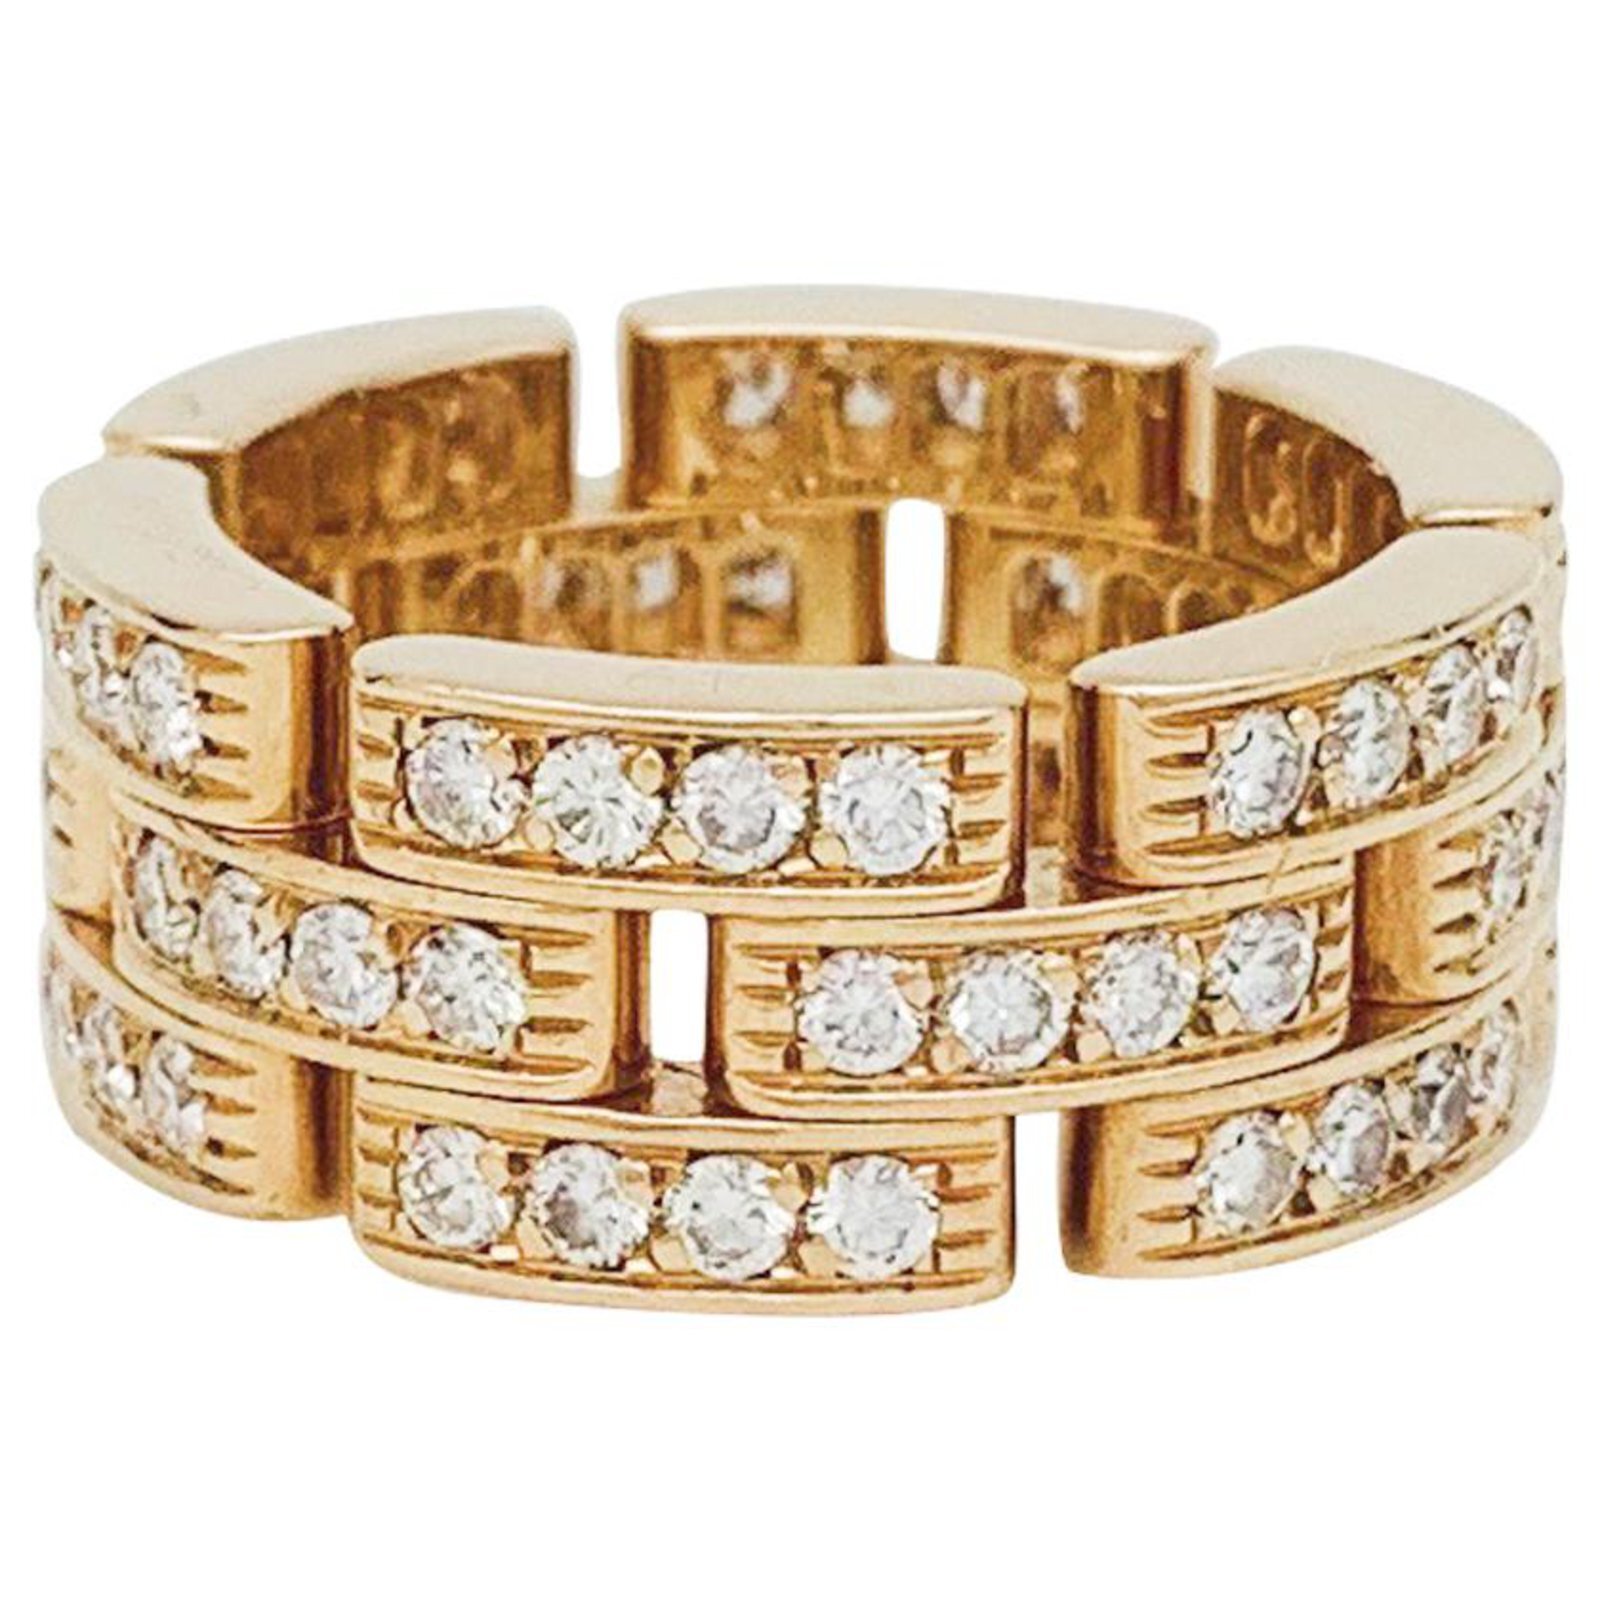 Cartier Panthère Link Ring in Yellow Gold with Diamonds — UFO No More